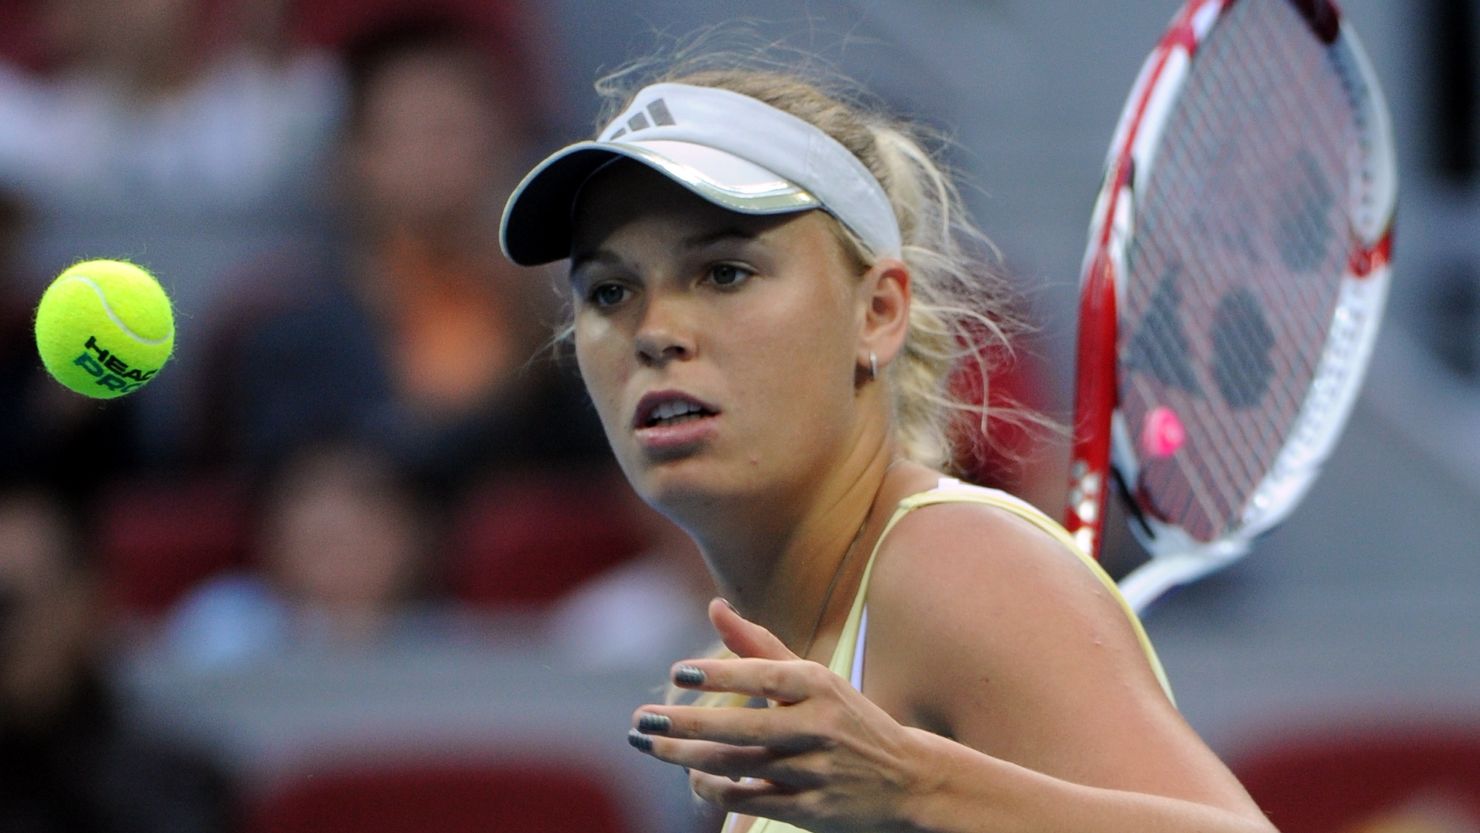 Caroline Wozniacki was extended to three sets before going through in the China Open 